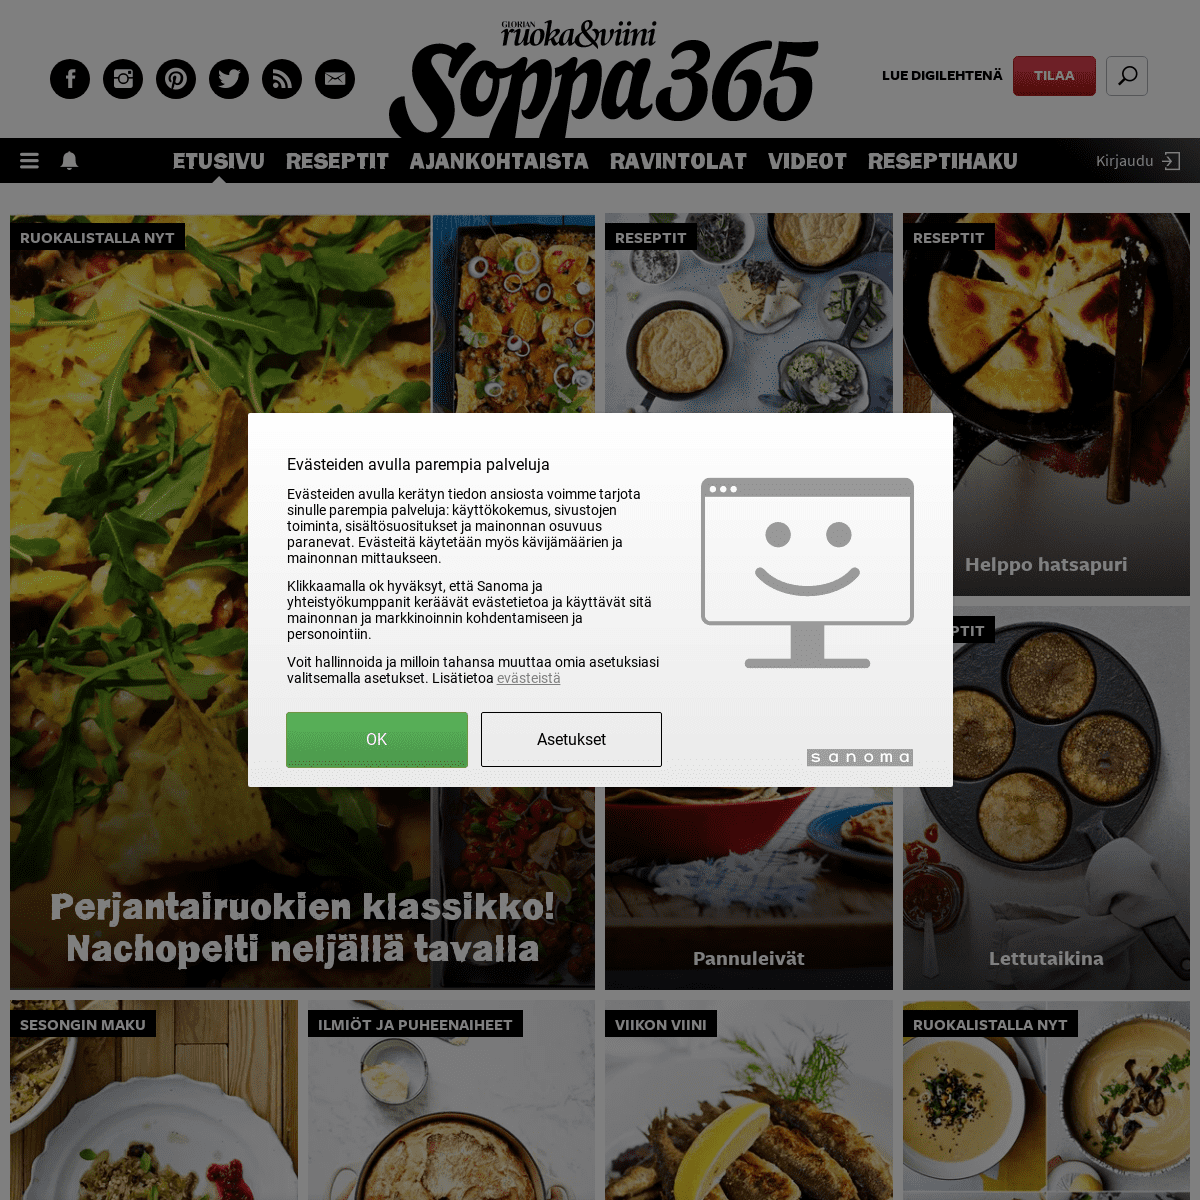 A complete backup of soppa365.fi